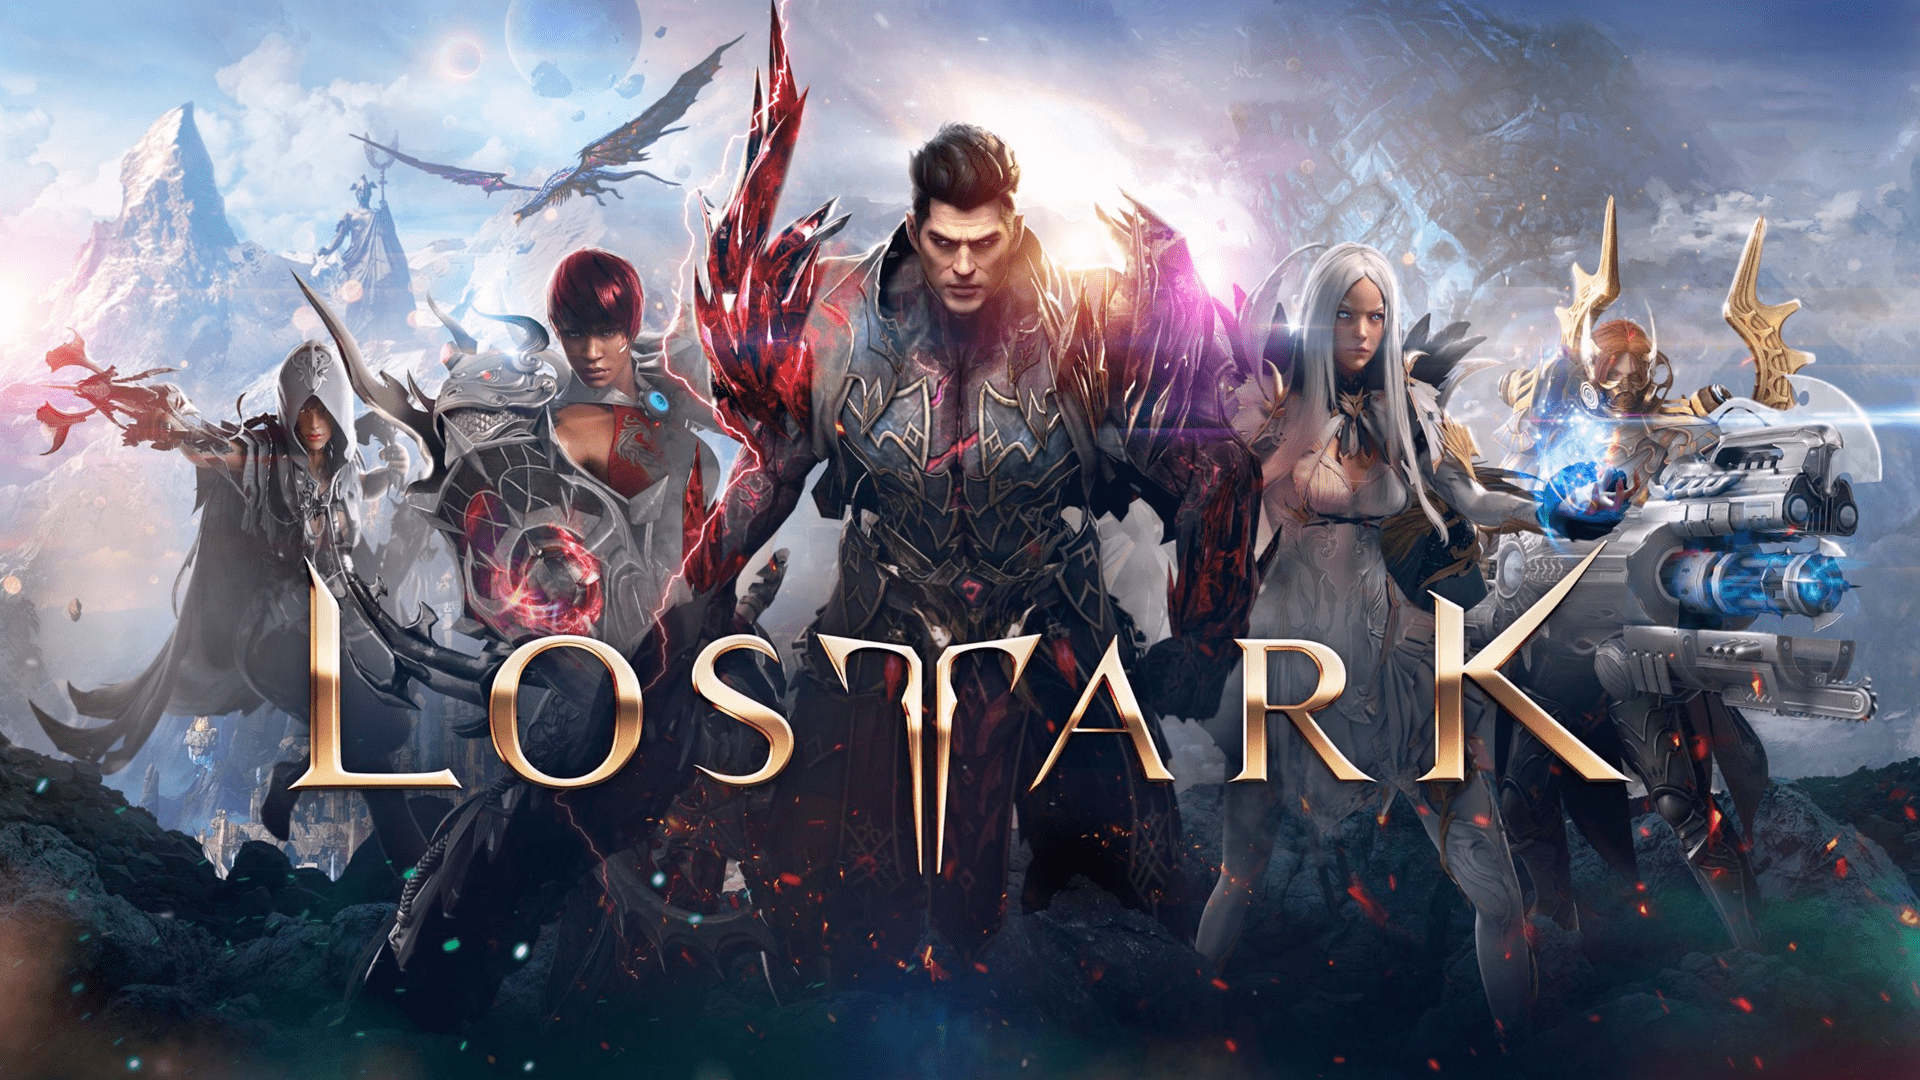 Lost Ark artwork and logo